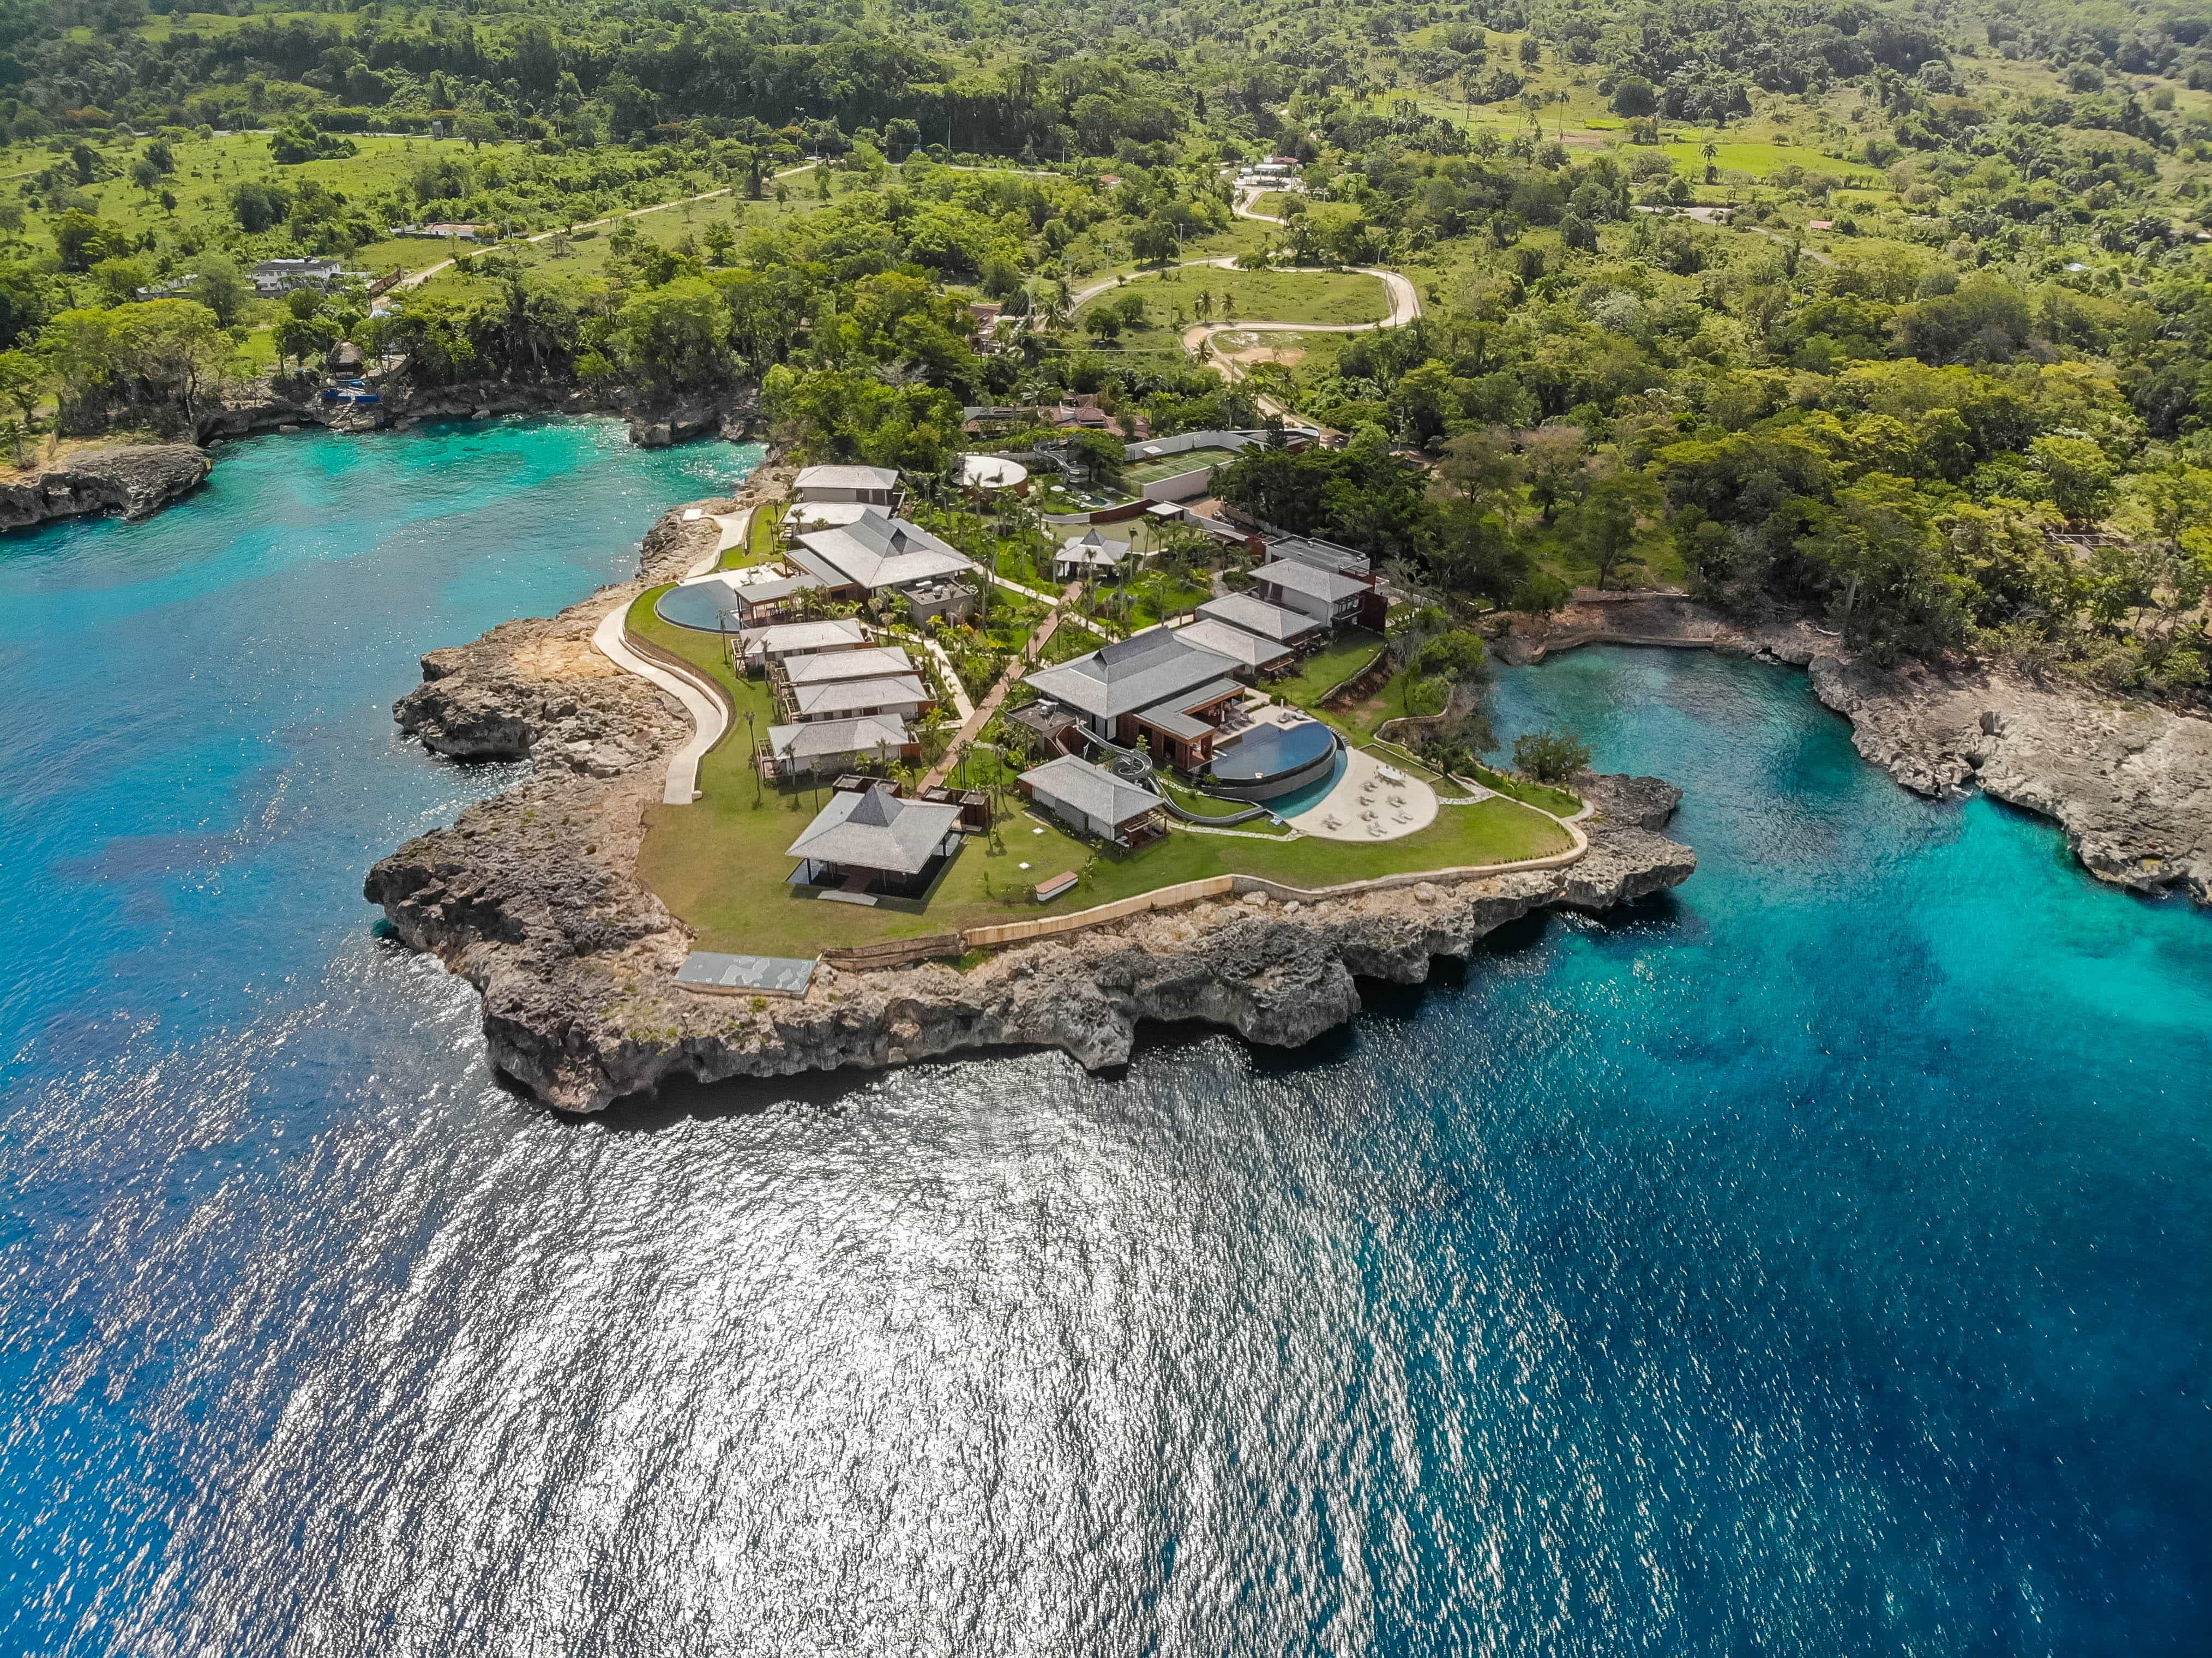 Location is everything and Ani Villas has a location better than most on its own secluded peninsula jutting into Dominican blue.